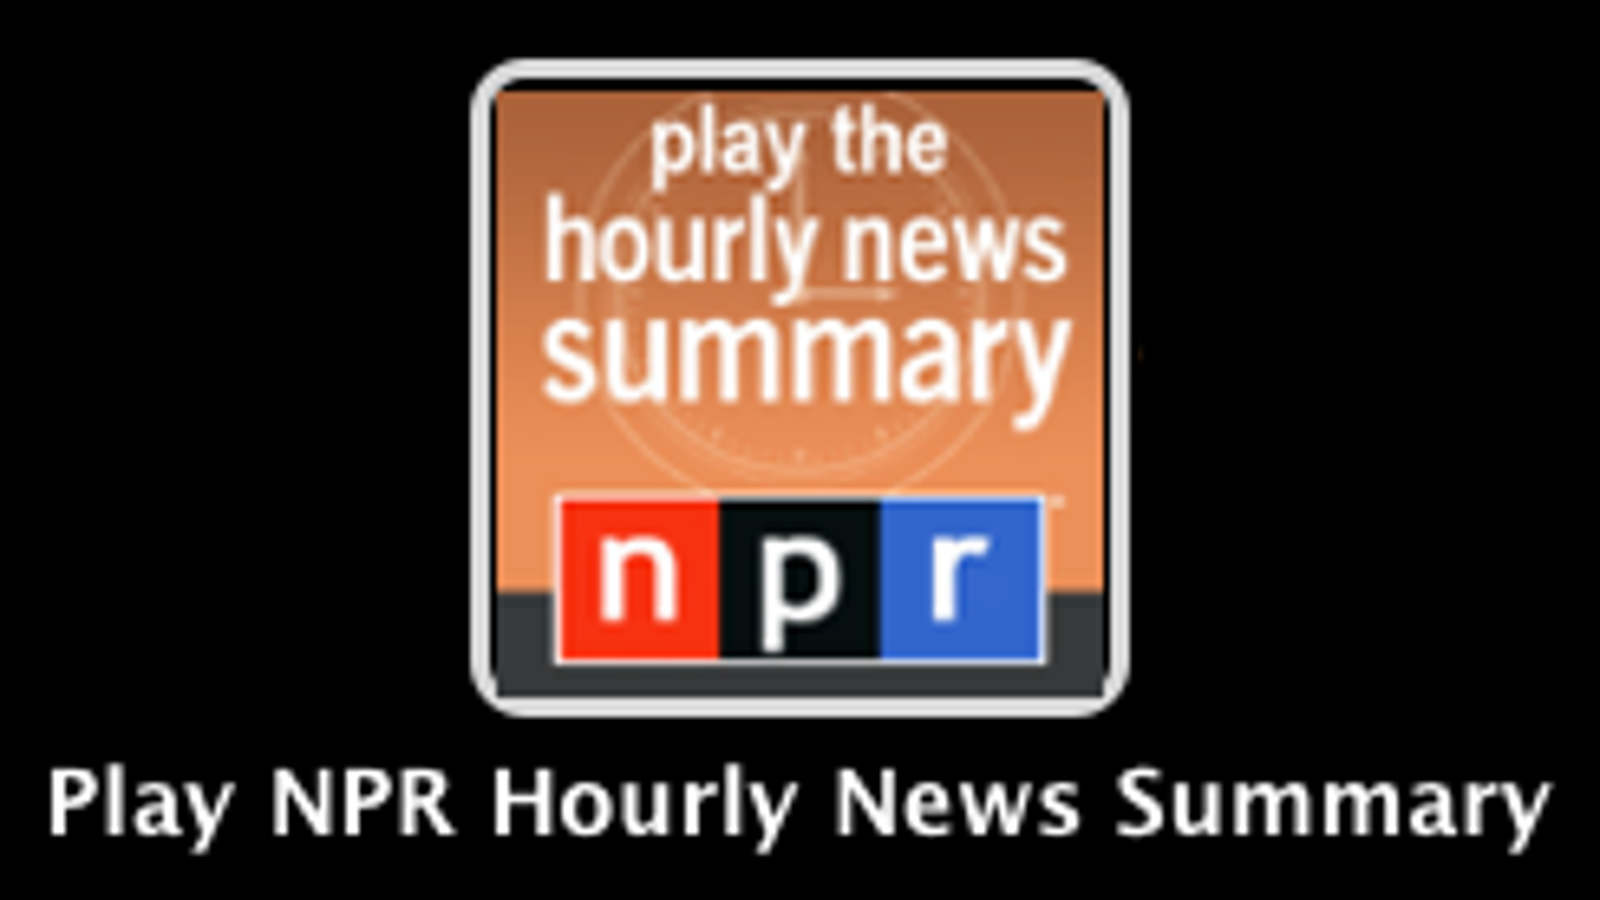 a radio station airs hourly news updates every morning